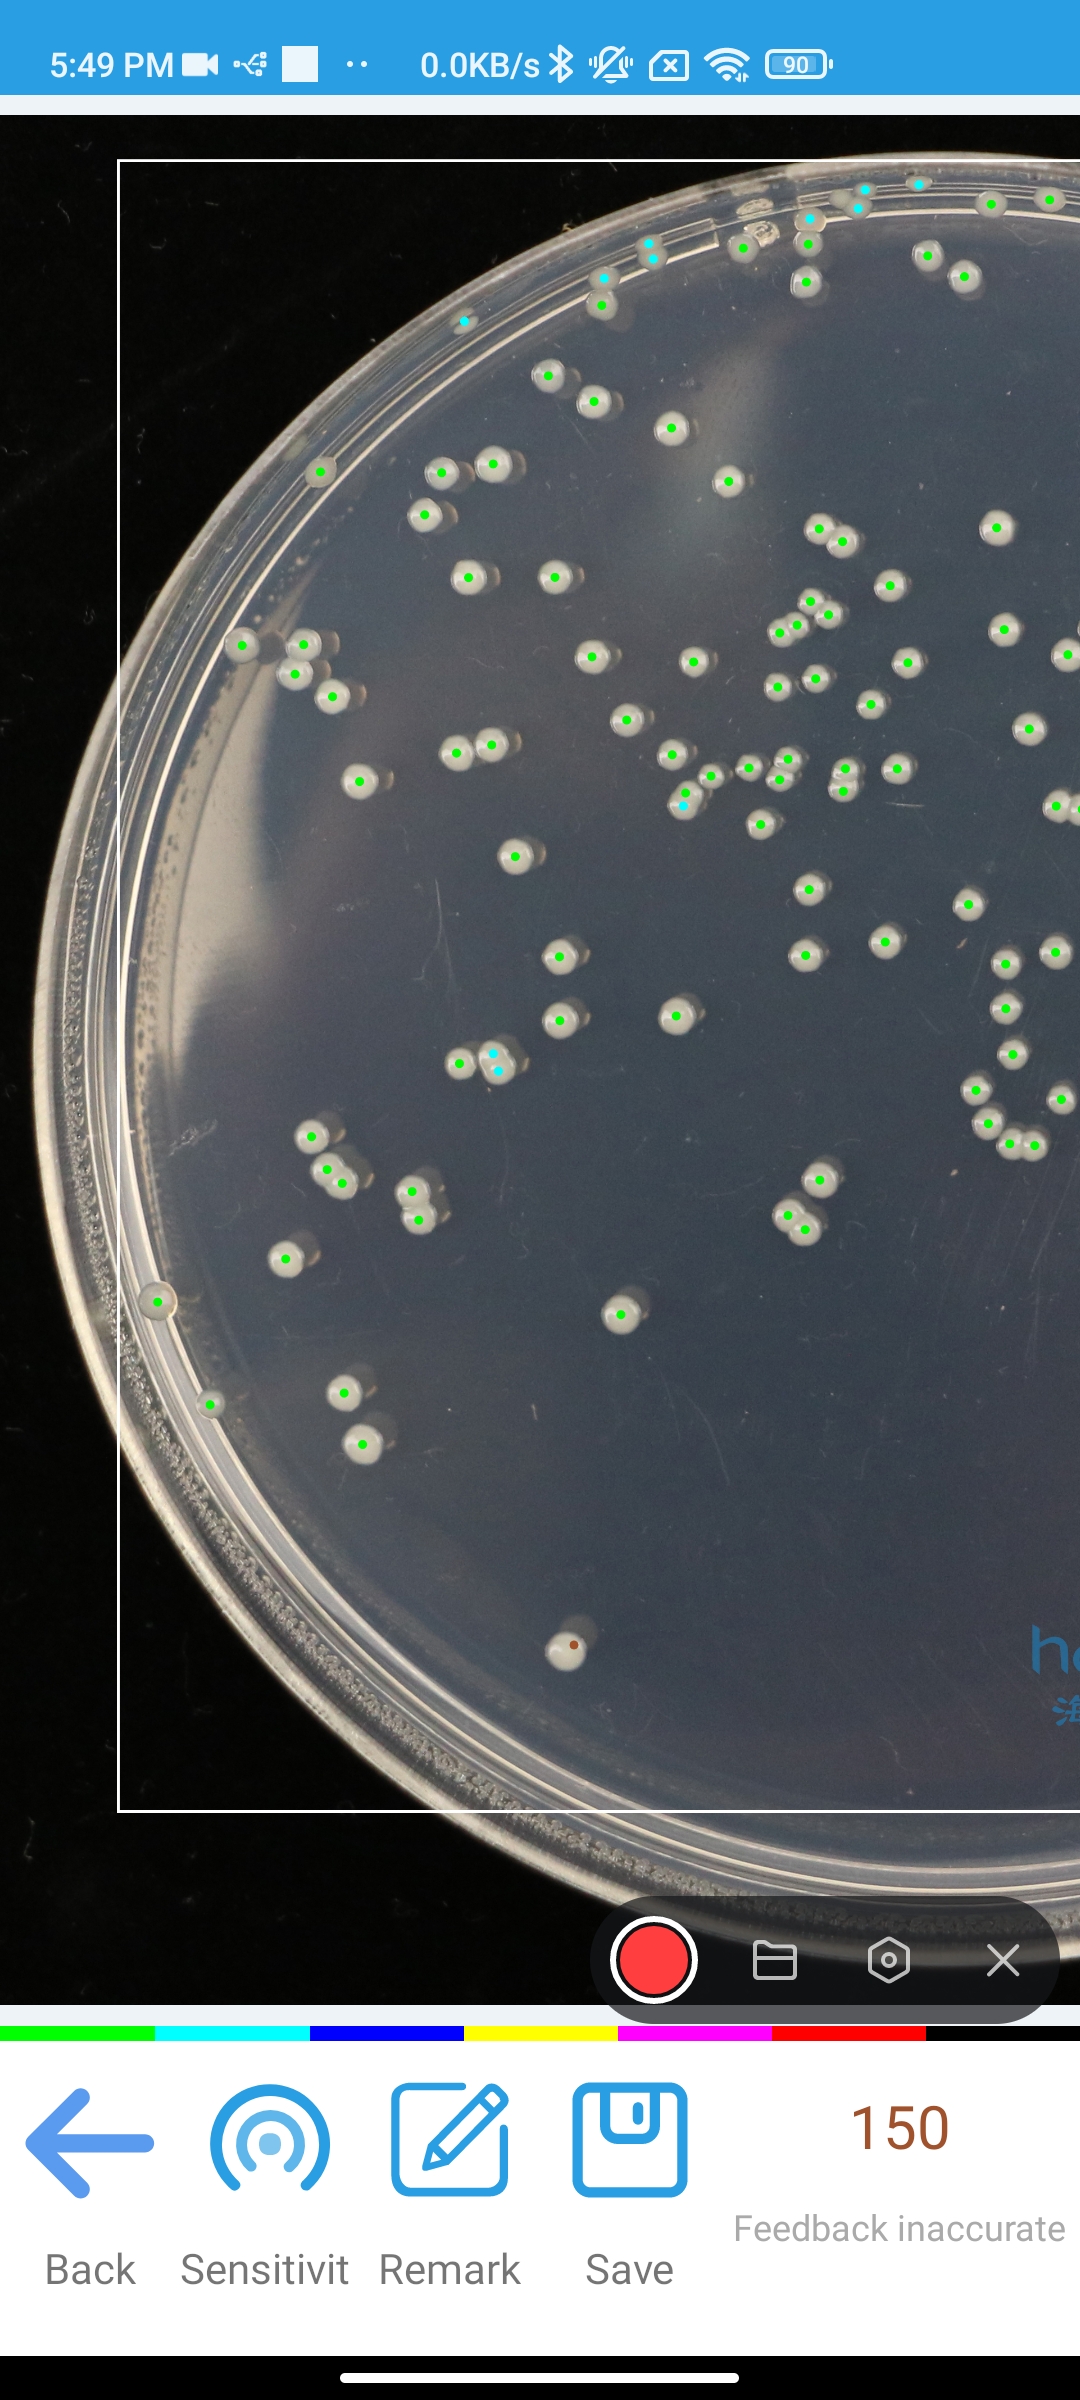 How to cutomated count bacterial colonies on agar